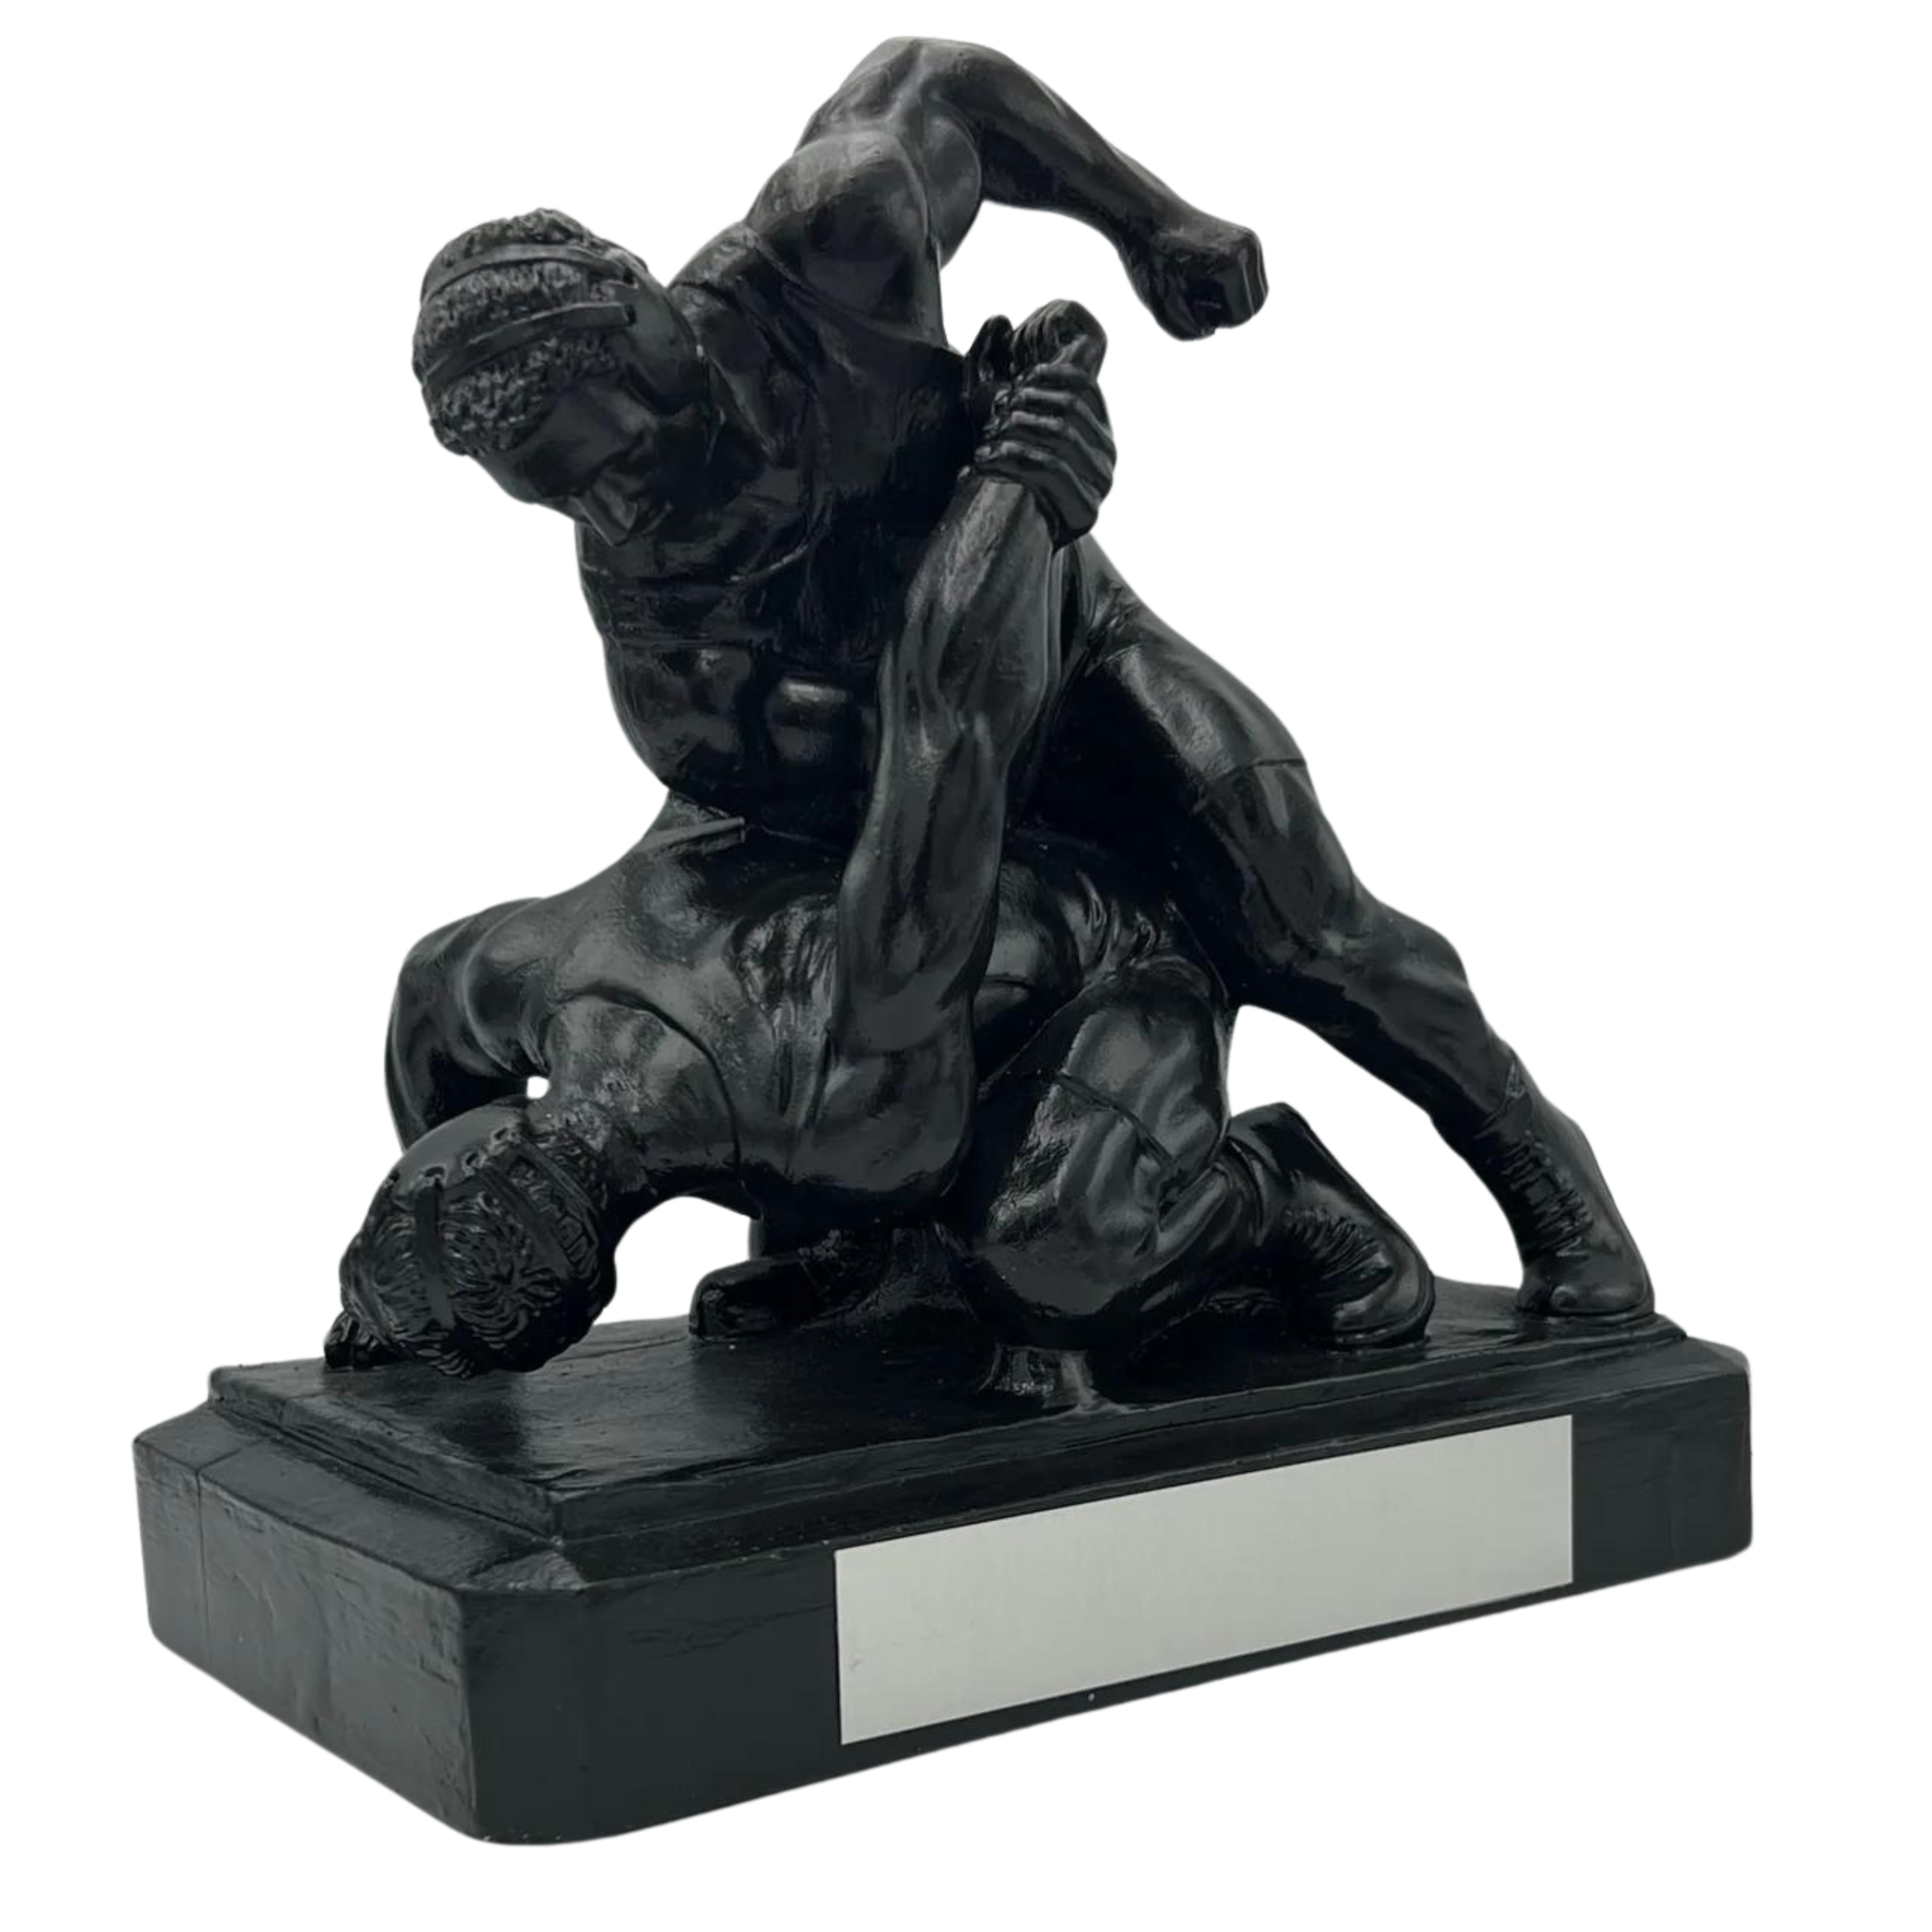 Sculptured classic wrestling statue two man Guillotine